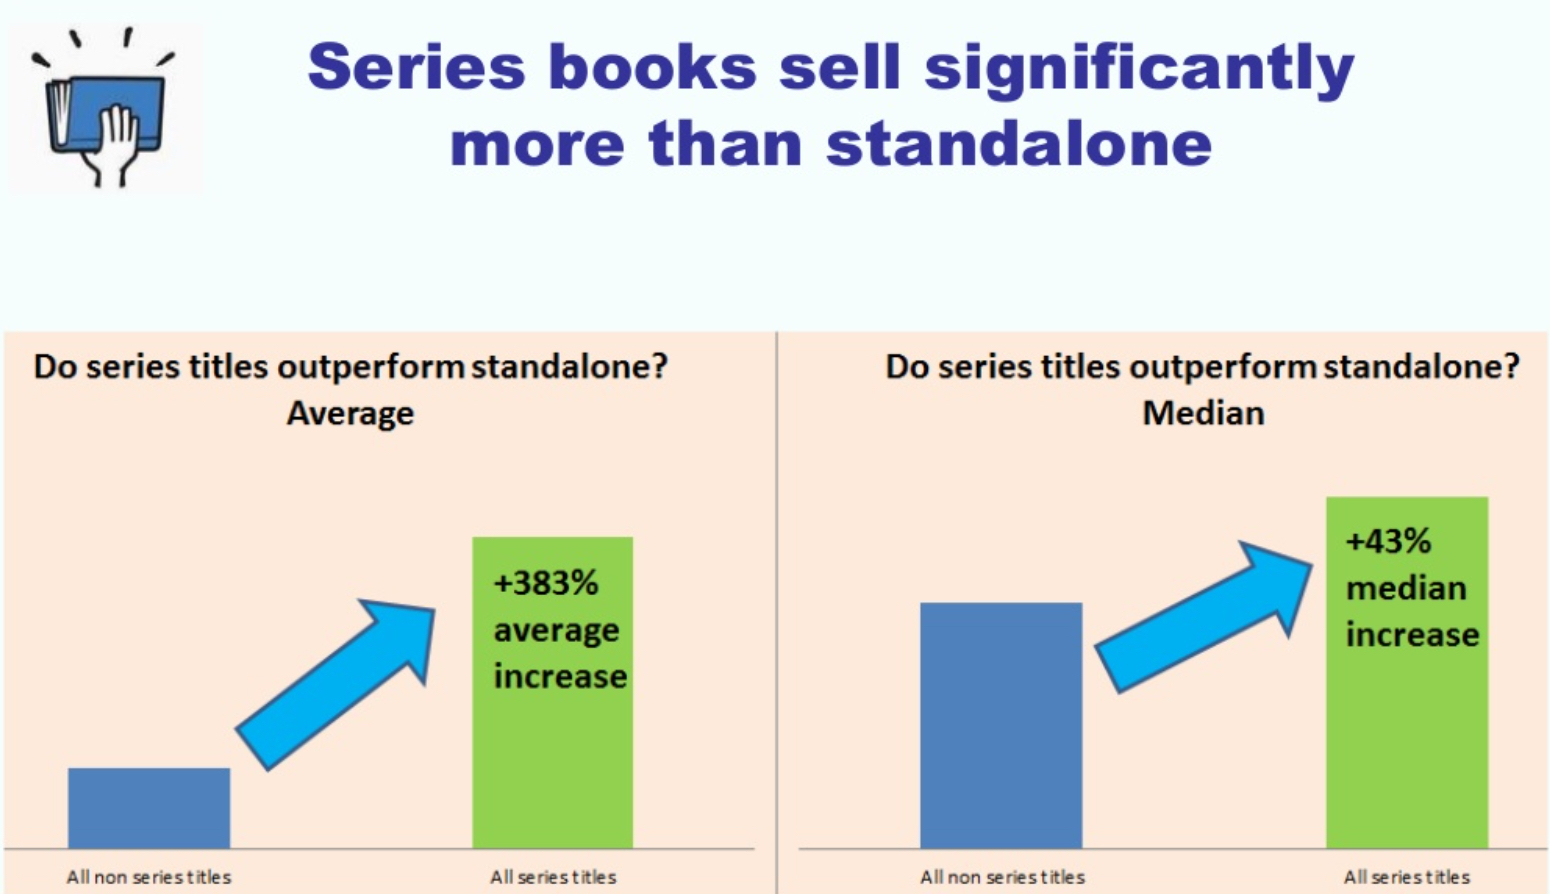 Smashwords Report 2017 - Series books sell significantly more than standalone